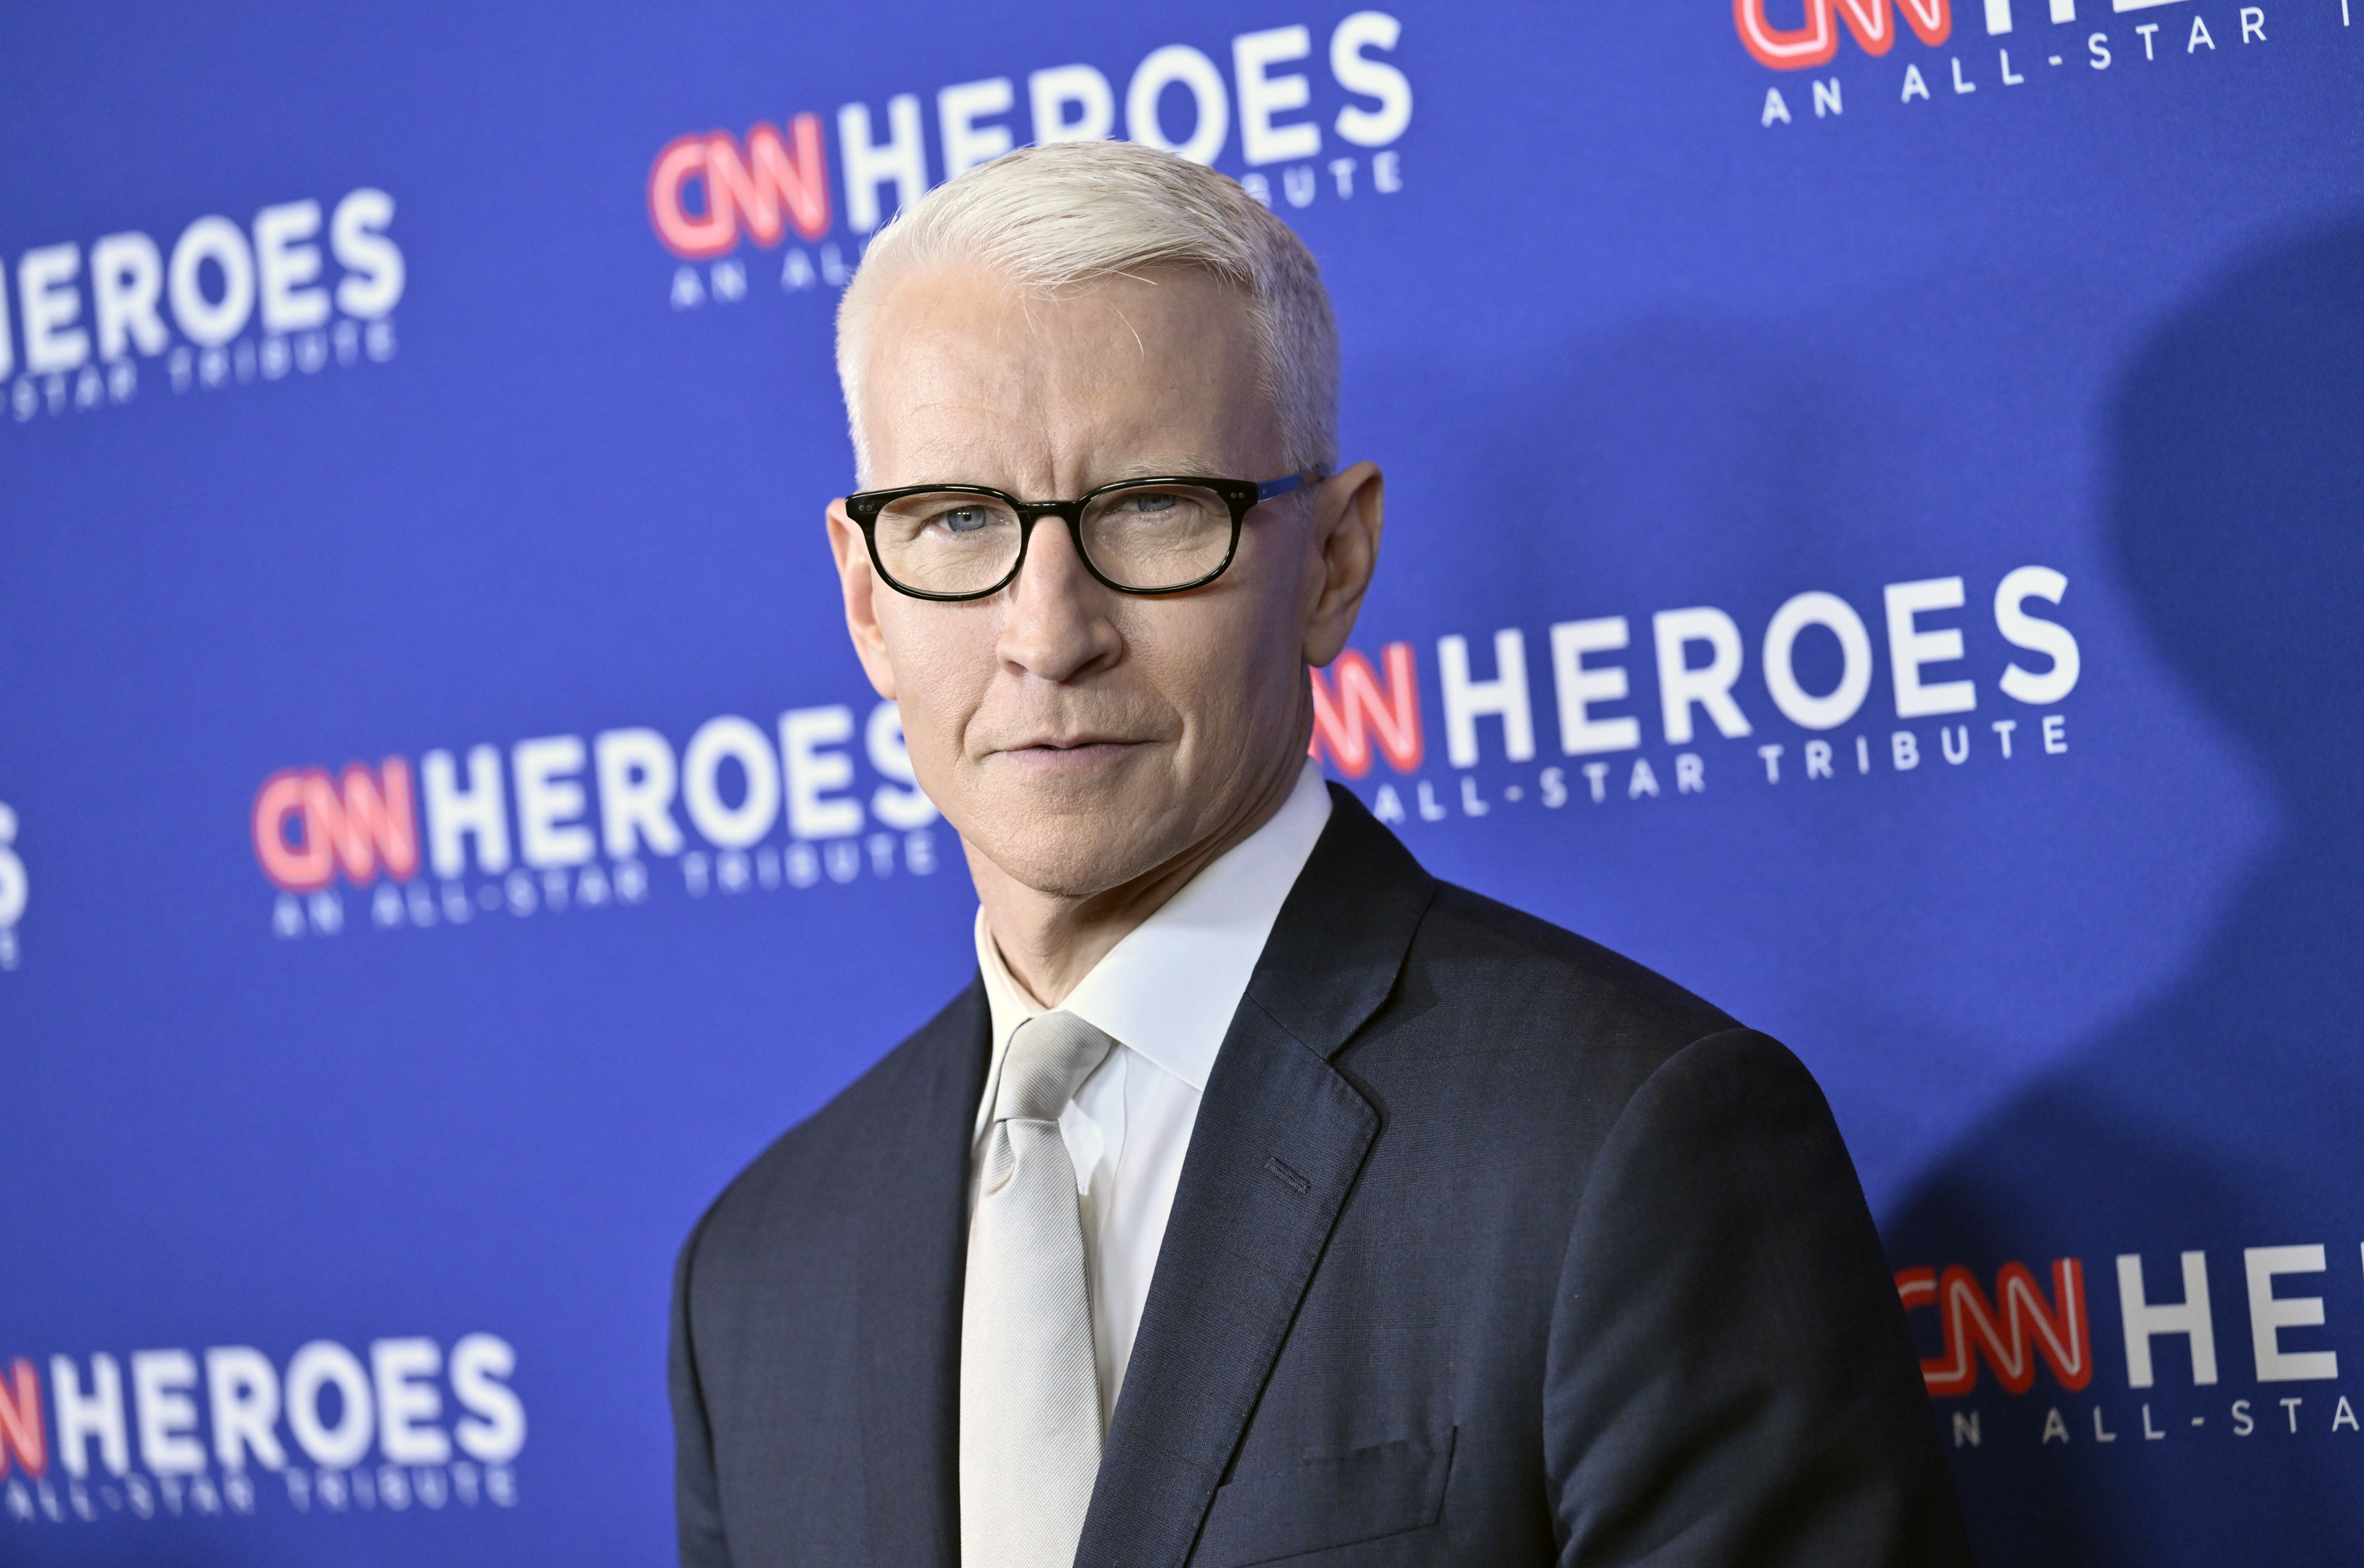 FILE - Anderson Cooper attends the 16th annual CNN Heroes All-Star Tribute in New York on Dec. 11, 2022. Cooper hosts a podcast, “All There Is," about grief. (Photo by Evan Agostini/Invision/AP, File)